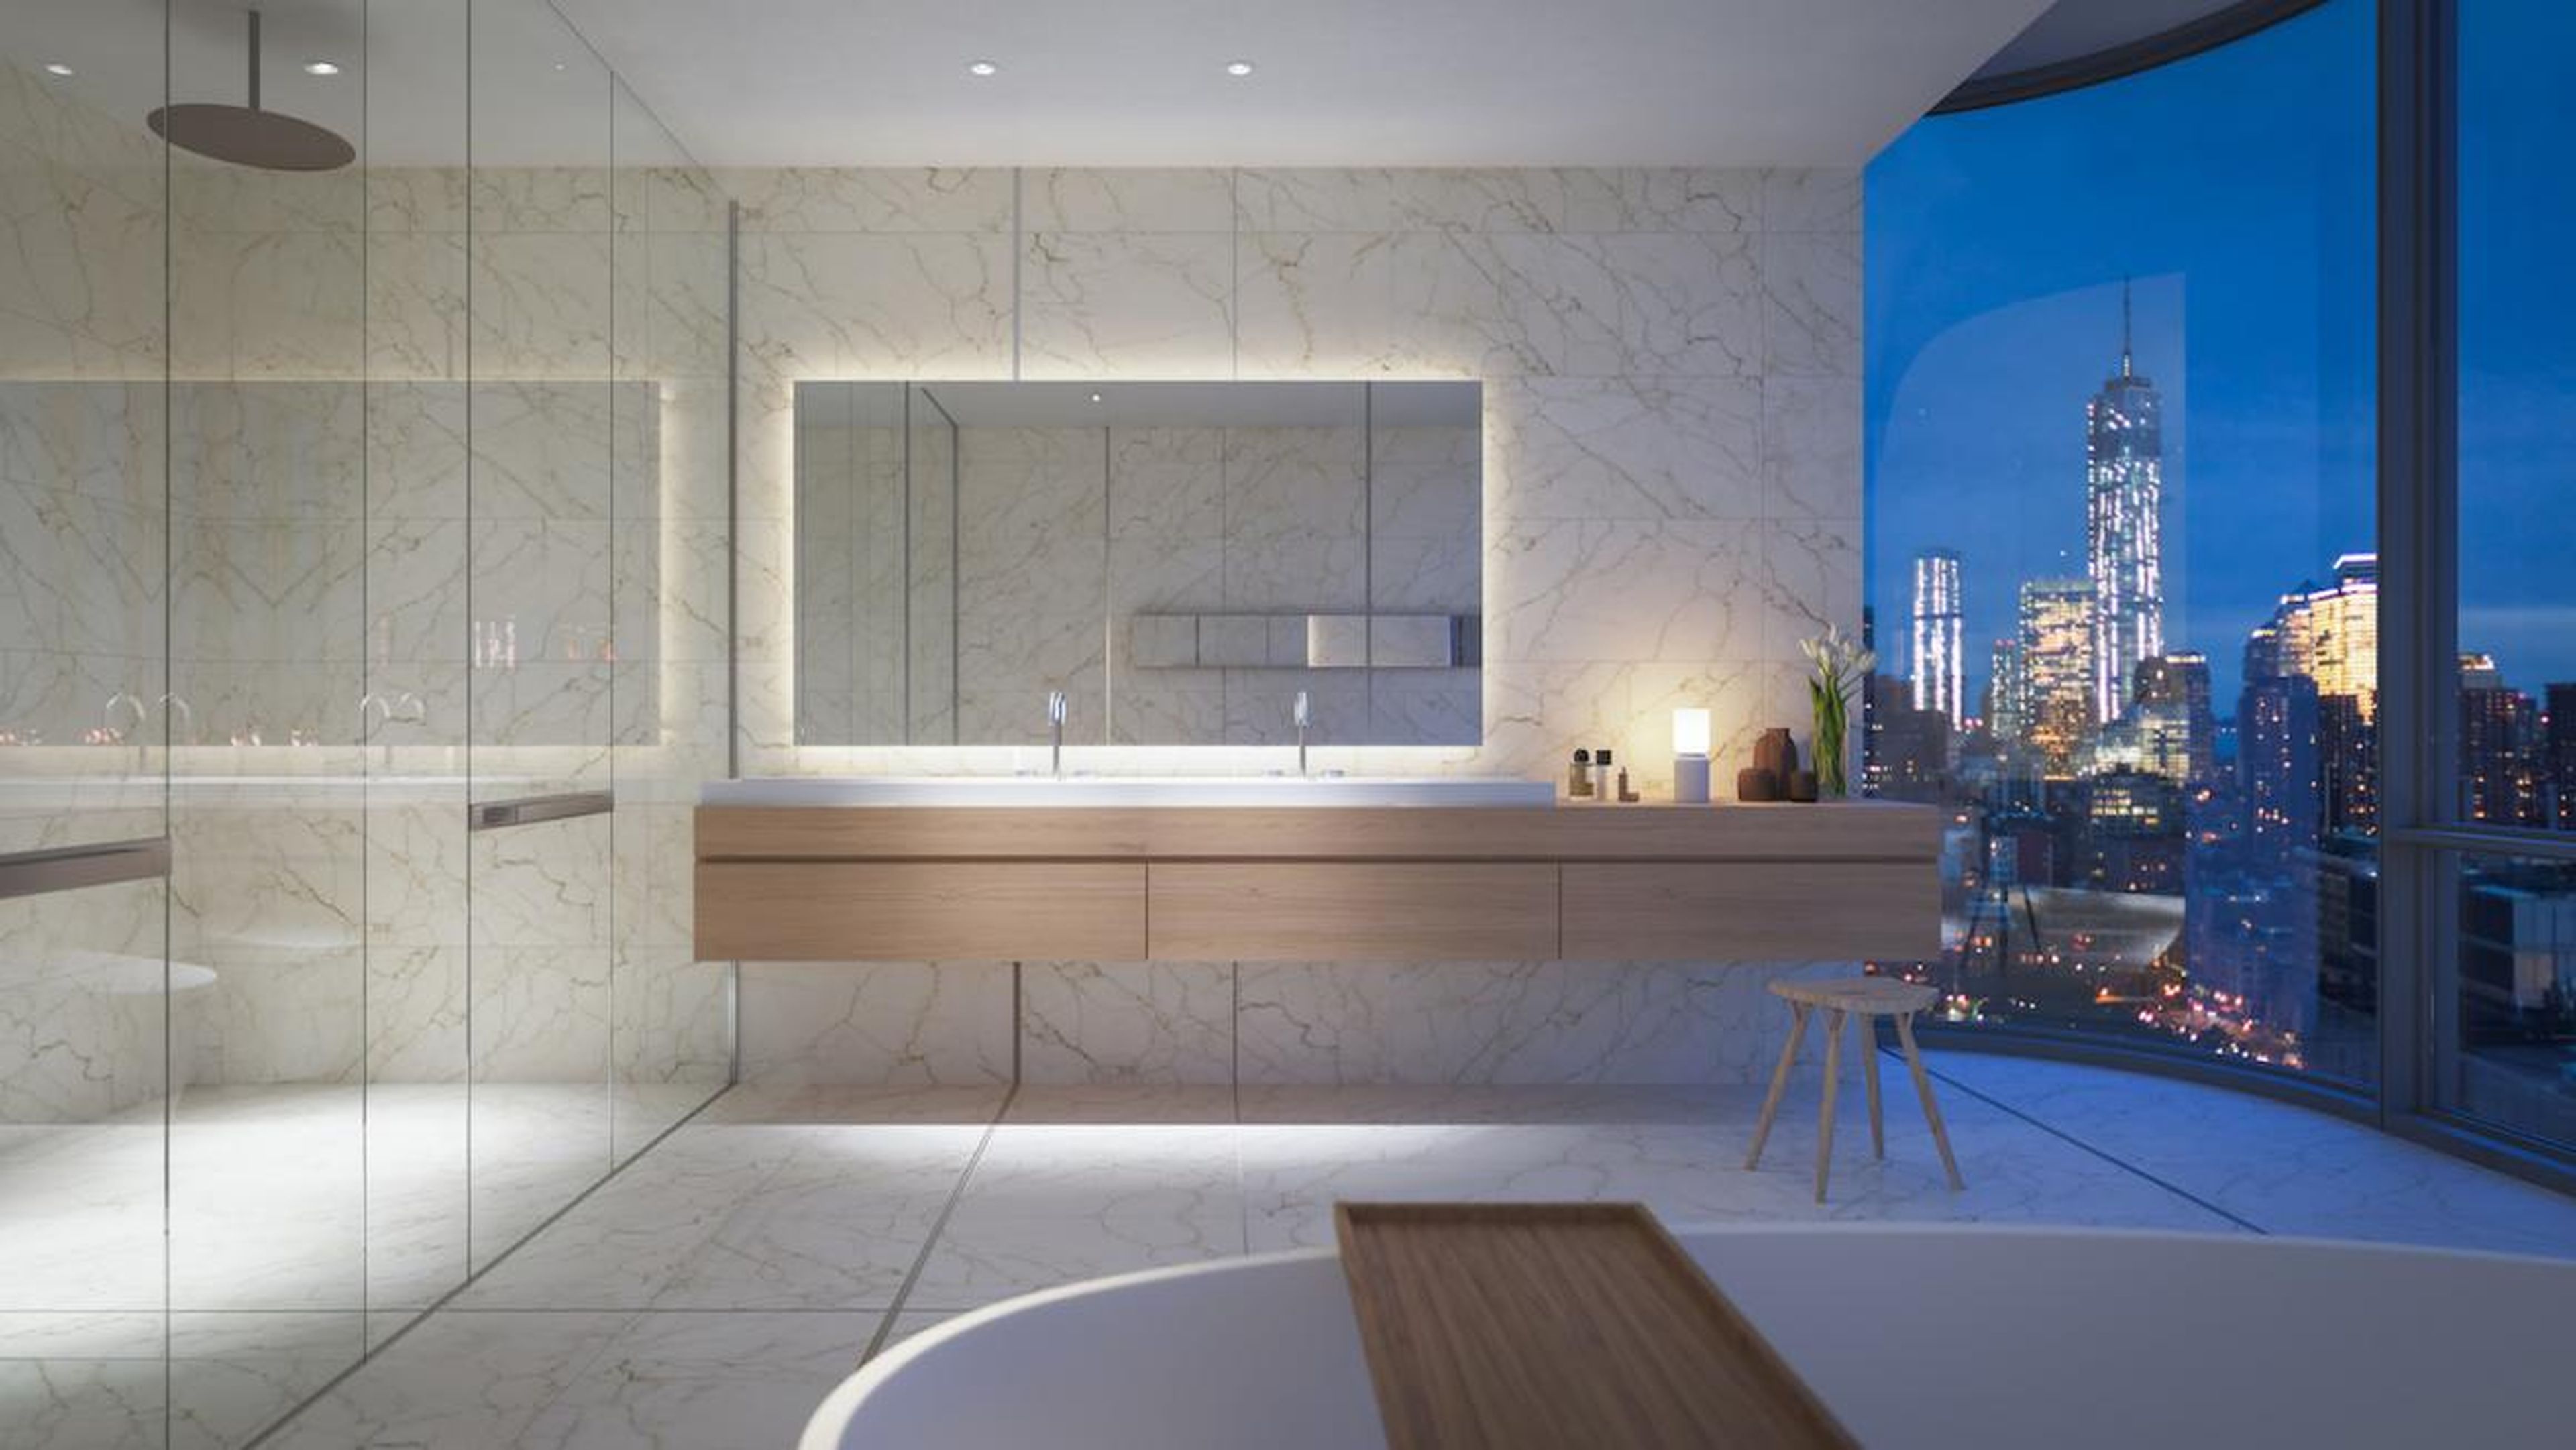 And the views don't end there. Even the master bathroom has massive windows next to a large bathtub and a shower that could rival the size of many Manhattan bedrooms.